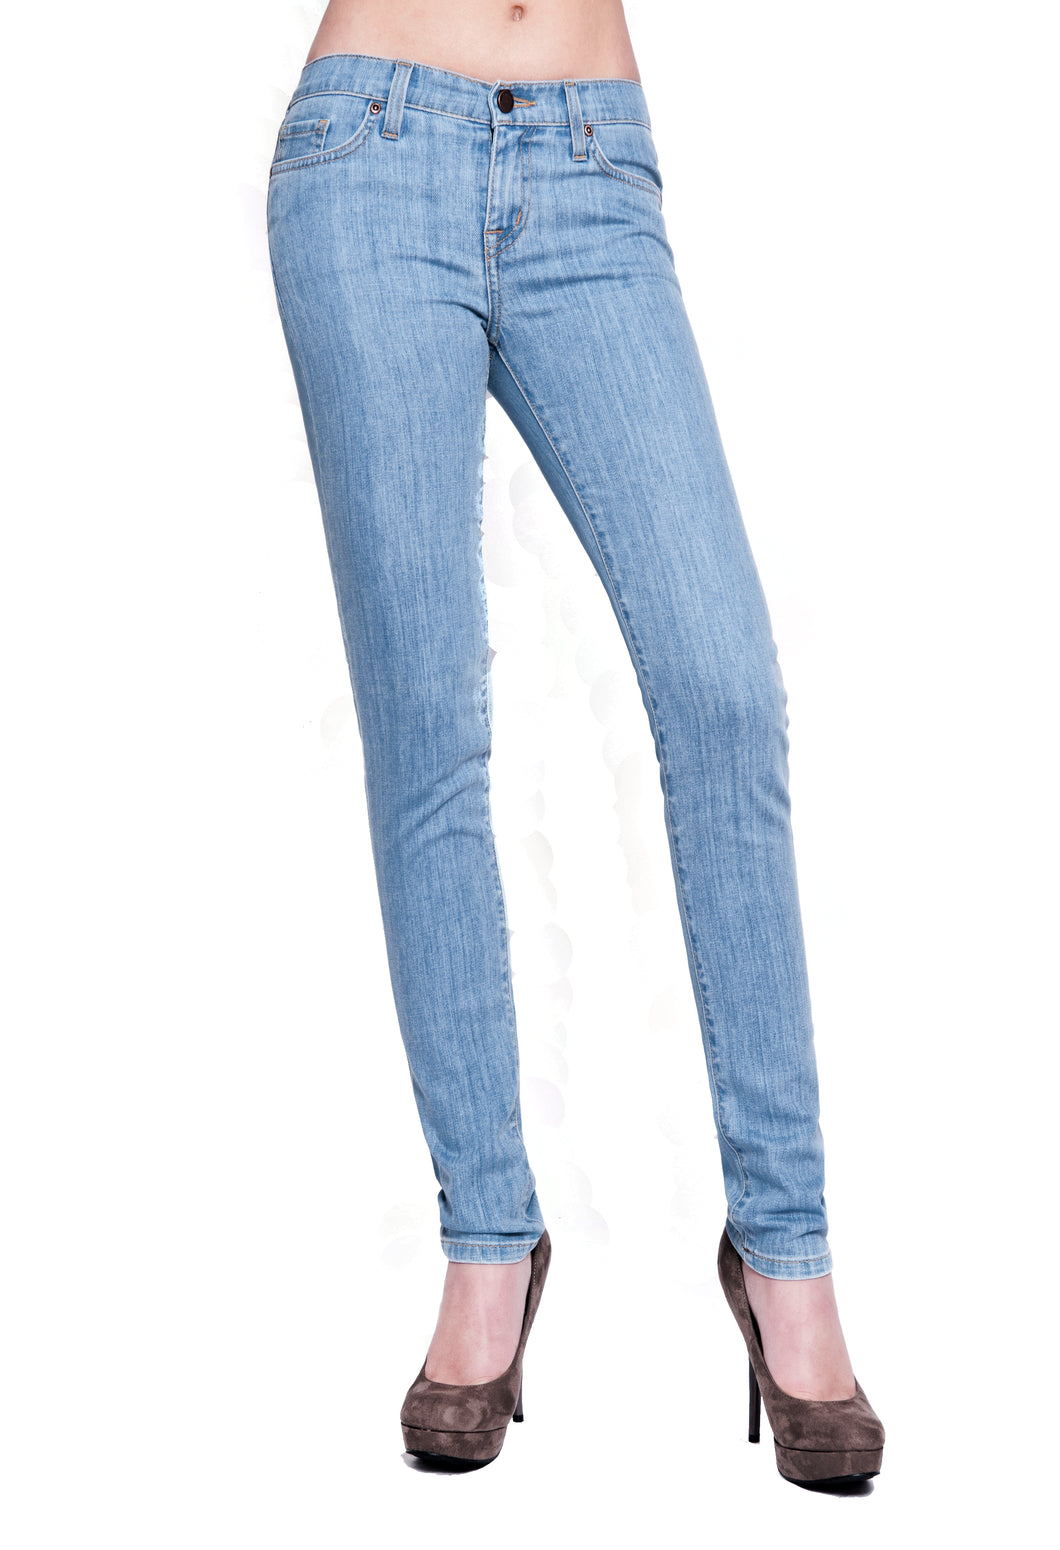 Candy Tight Light Blue Skinny Jean - LIMITED EDITION